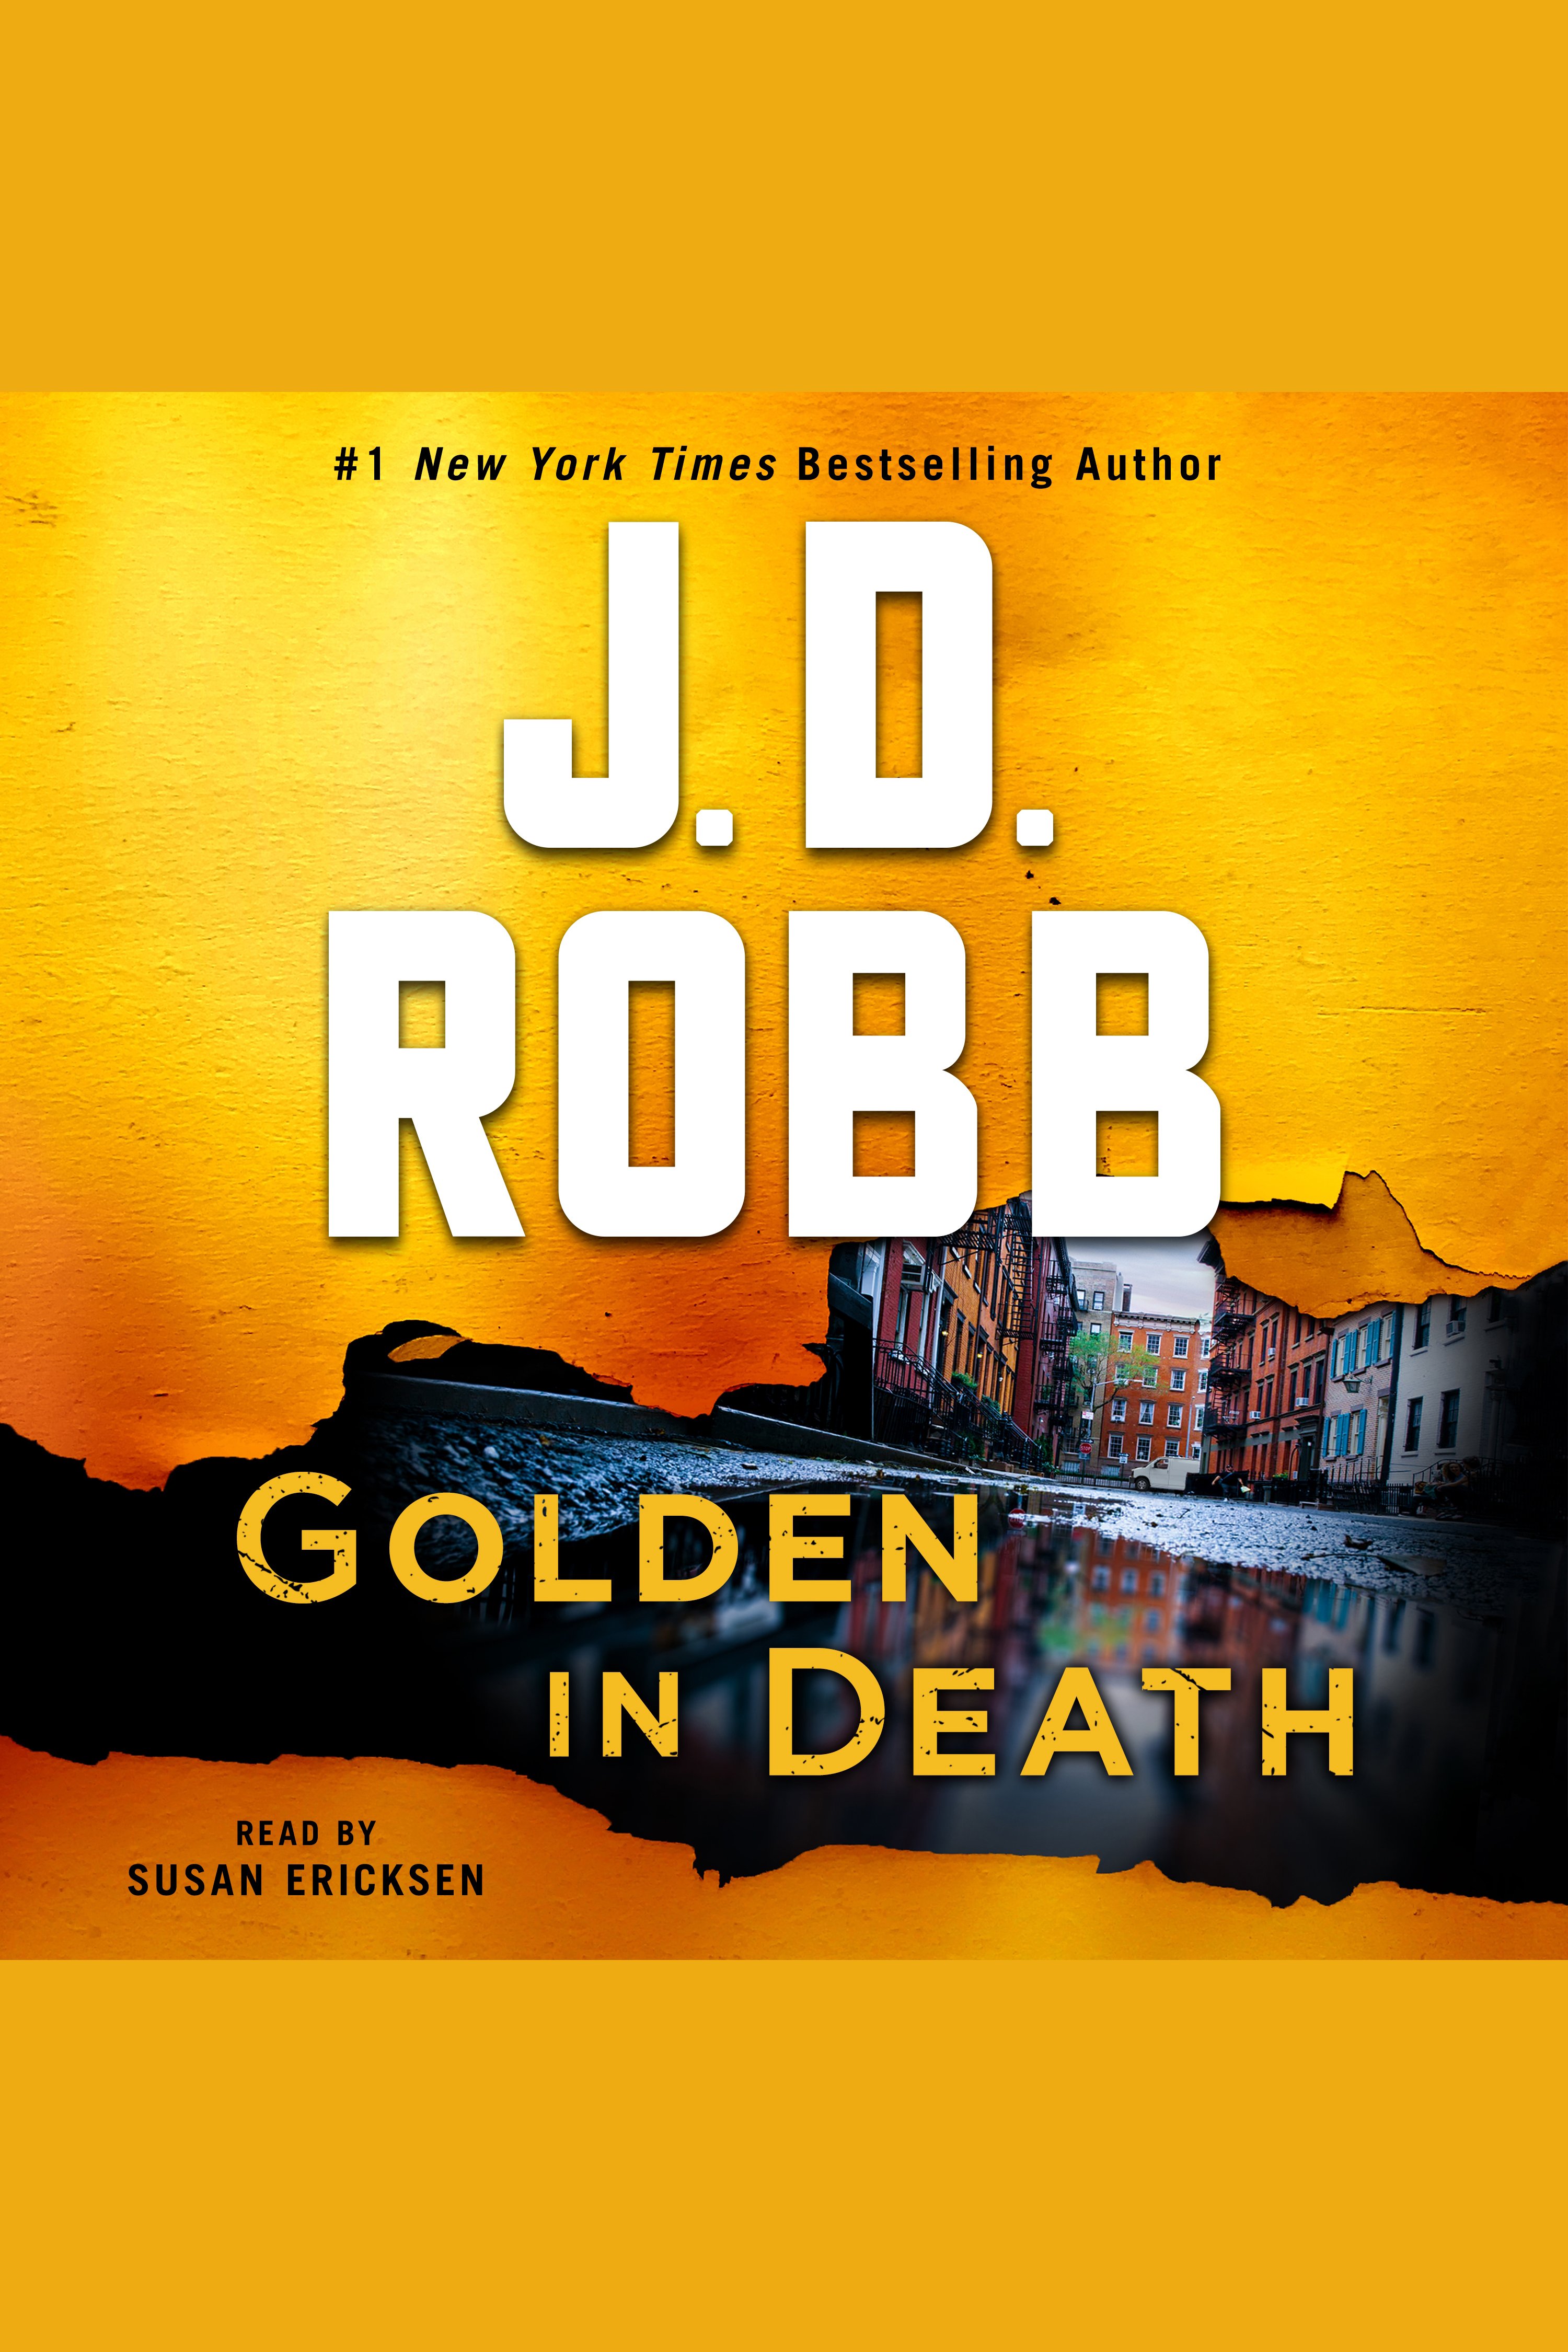 Golden in death cover image